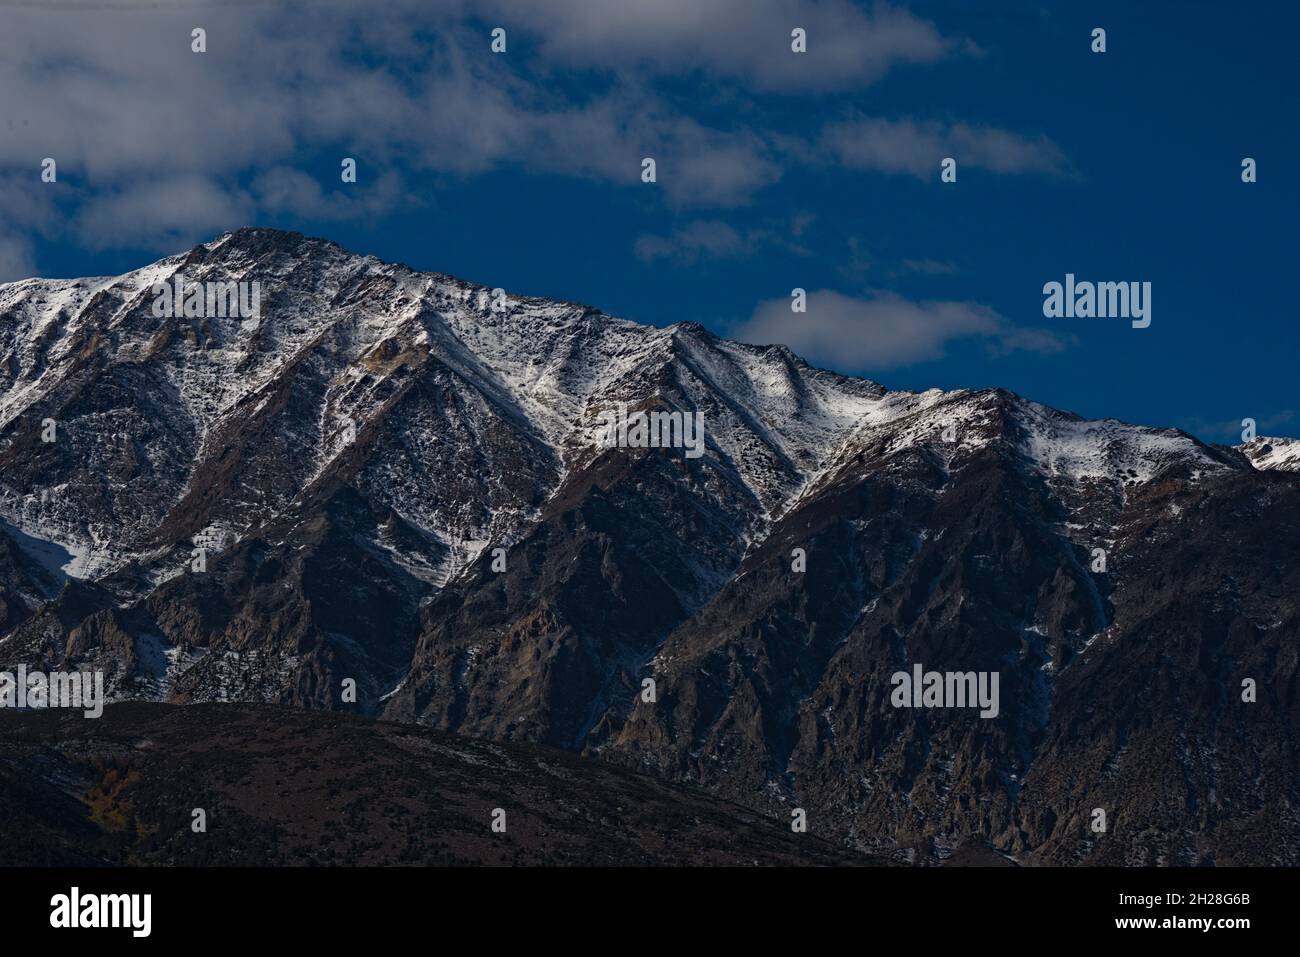 Snow capped Sierra Nevada mountains, showcasing ridgeline & defining its texture, changing patterns & shape.  Rich blue skies with lofty clouds. Stock Photo